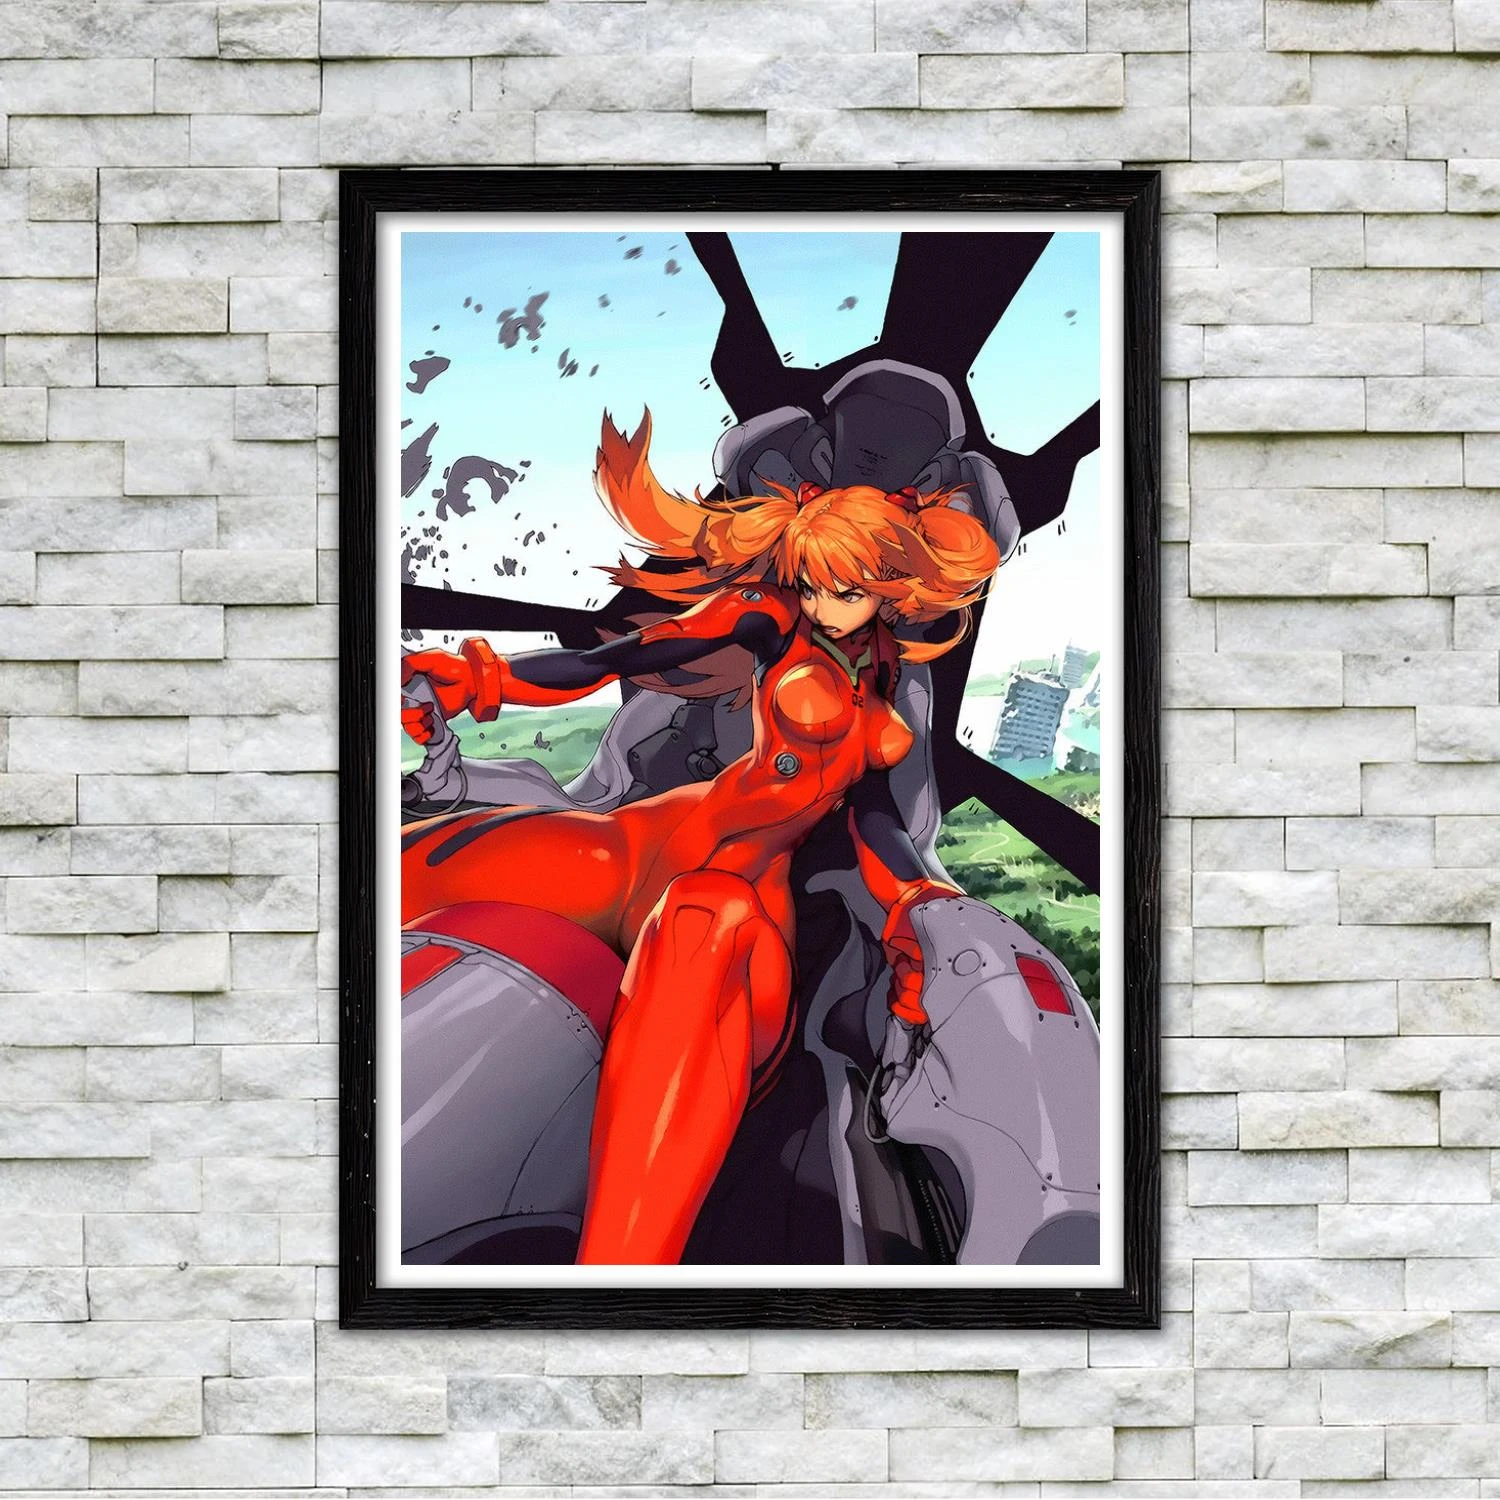 Classic Neons Genesis Asuka Mari Evangelions Poster Canvas Painting Posters and Prints Wall Art Picture Home 27 - Evangelion Store